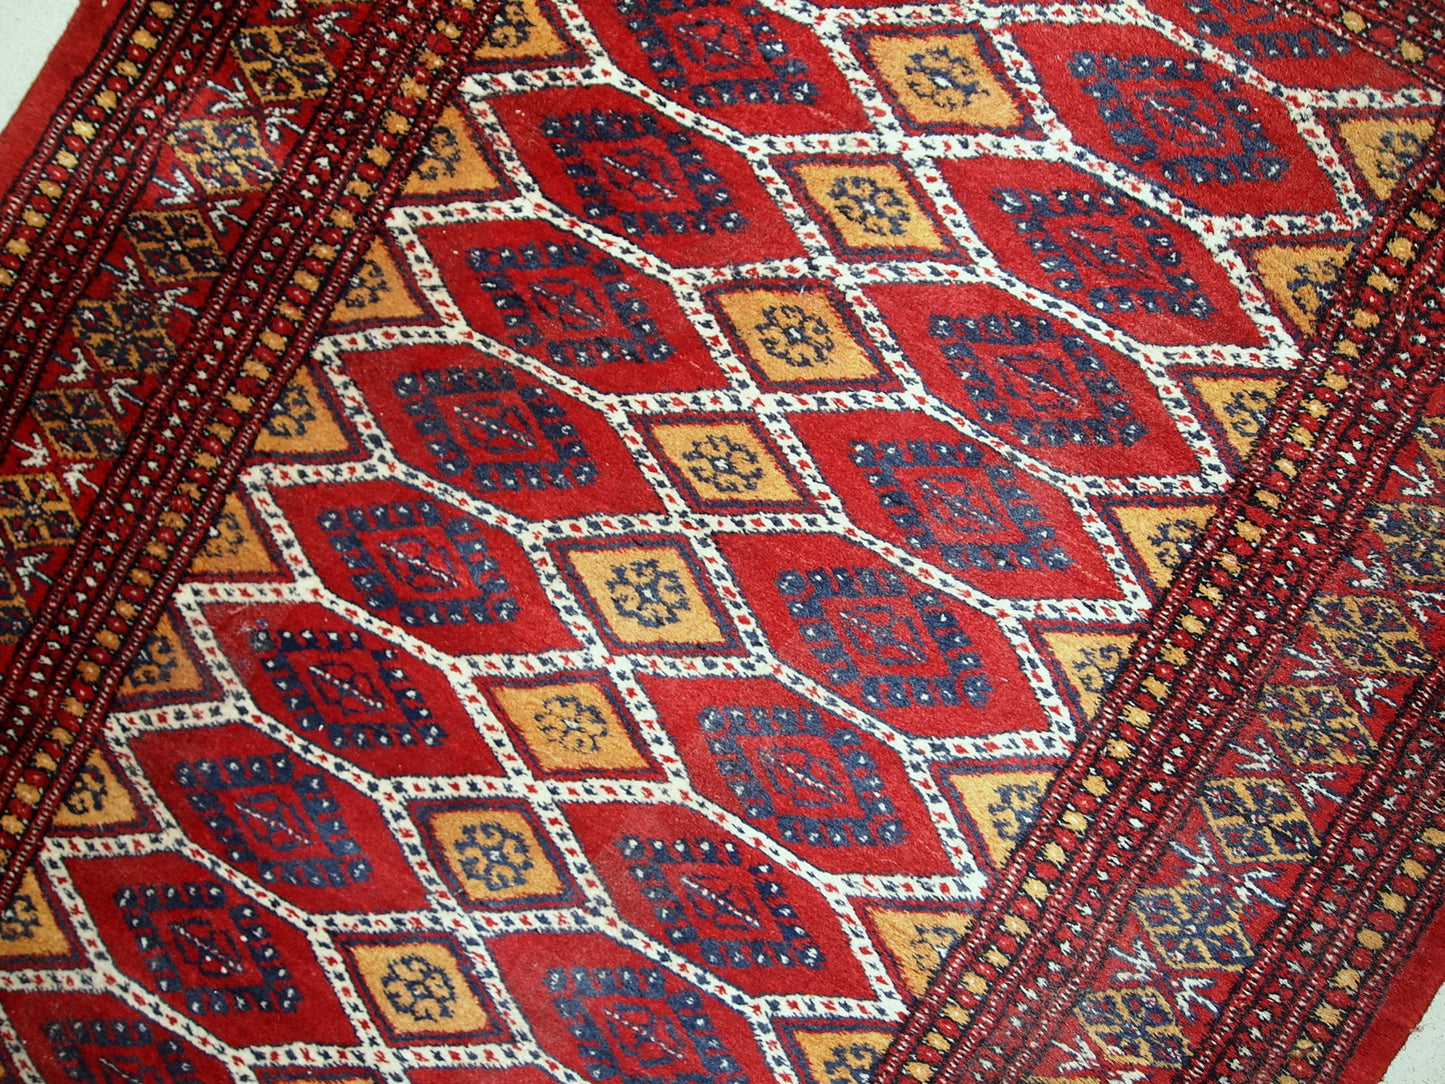 Vintage Uzbek Bukhara rug in red and yellow wool. The rug is from the end of 20th century in original good condition.